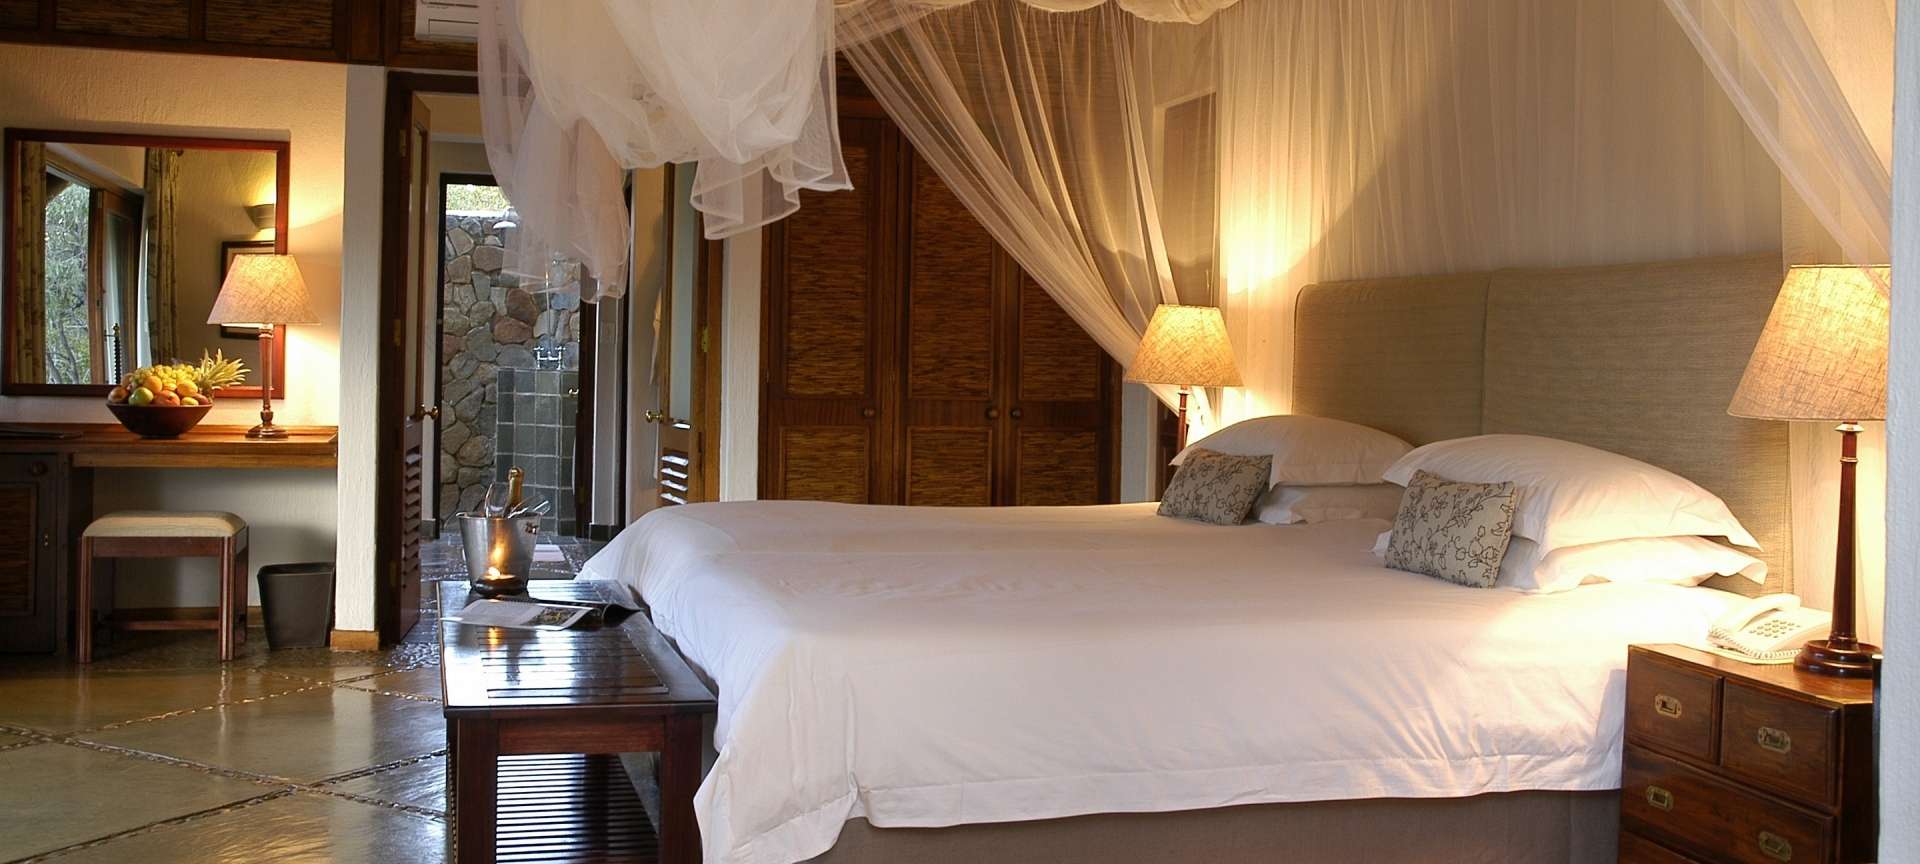 Bedrooms at Thornybush Game Lodge